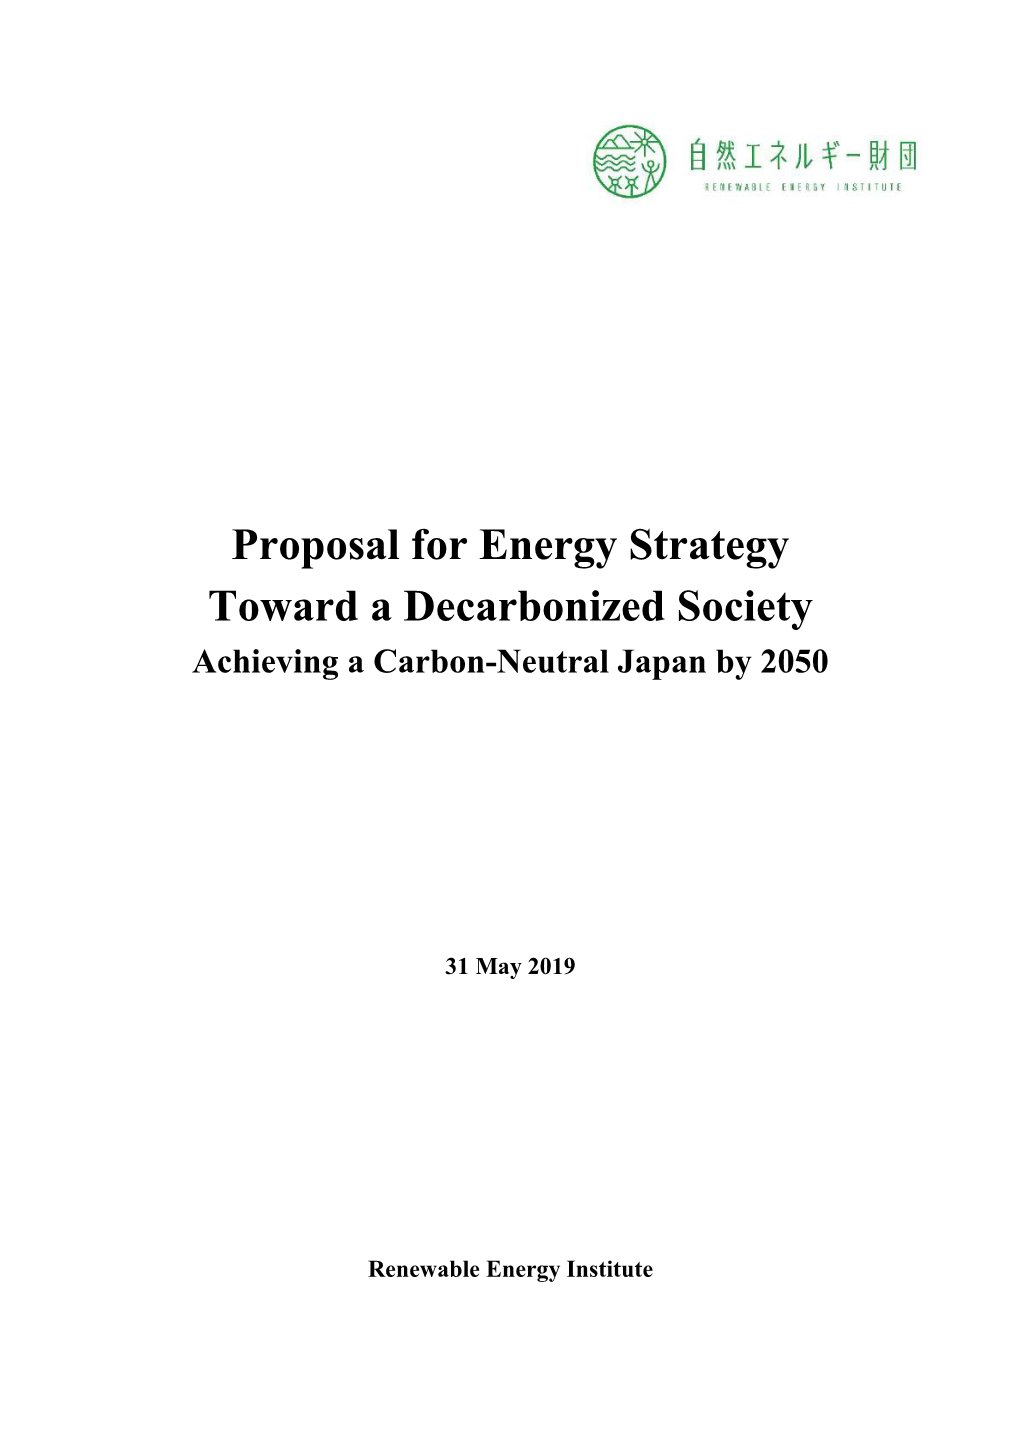 Proposal for Energy Strategy Toward a Decarbonized Society Achieving a Carbon-Neutral Japan by 2050